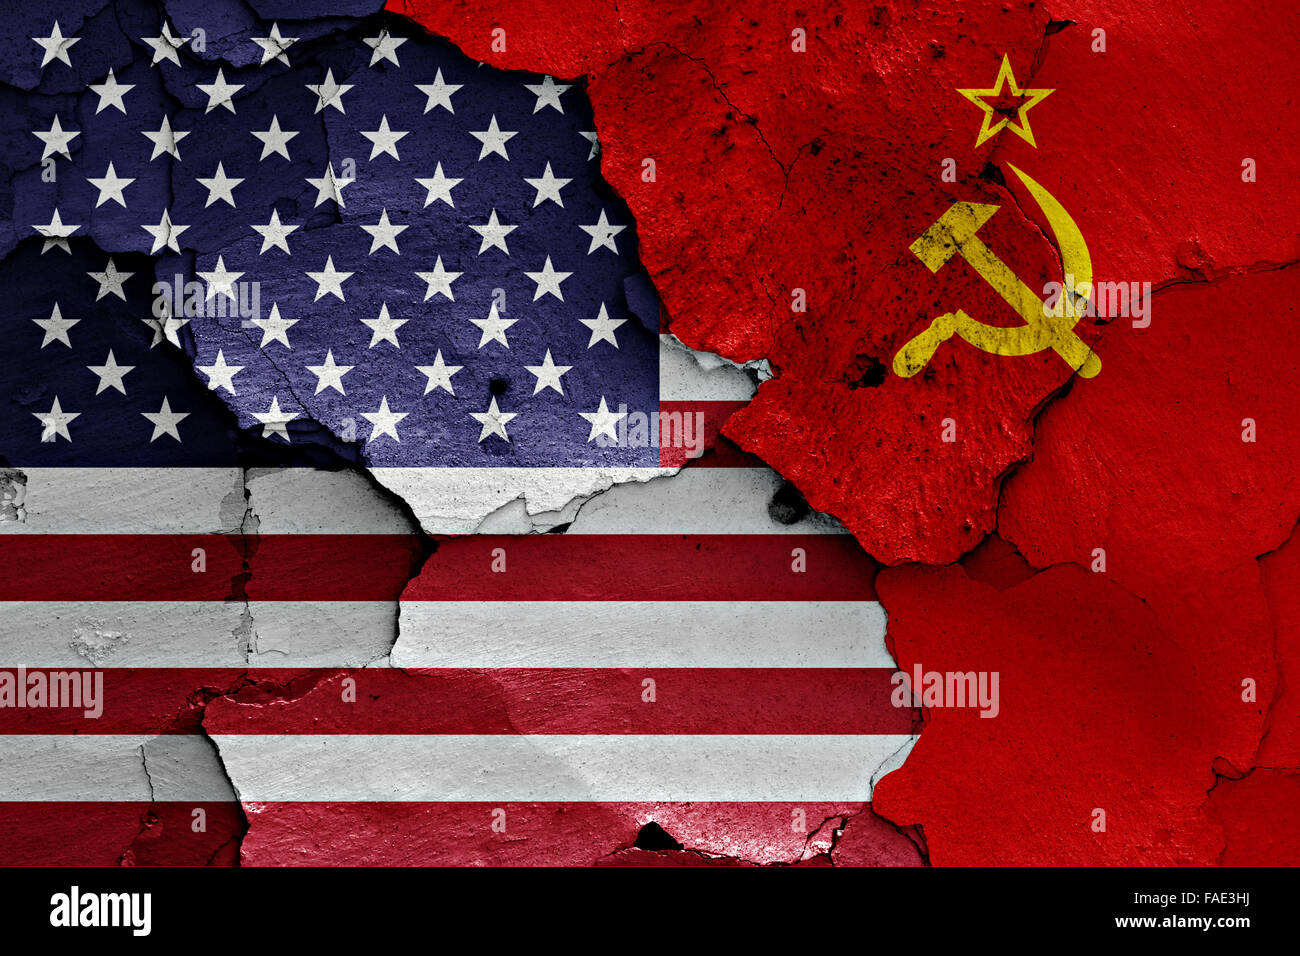 flags of USA and Soviet Union painted on cracked wall Stock Photo